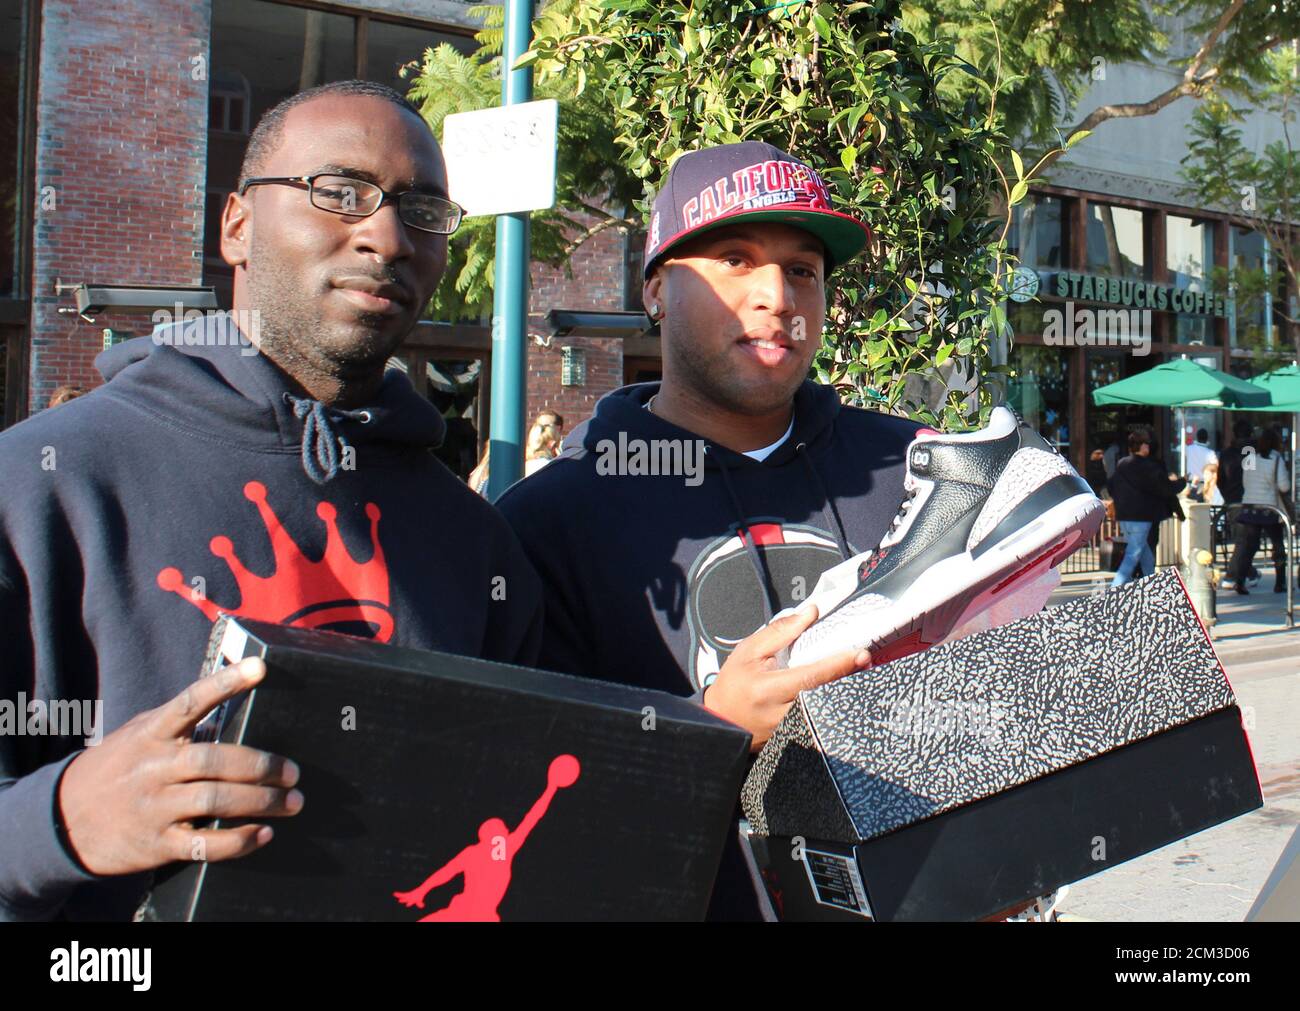 U.S. Navy Corpsmen Shawn Sykes (L) and Leon Clare show off the re-released Nike Air Jordan Retro 3 Black Cement sneakers purchased during a Black Friday sale in Santa Monica, January